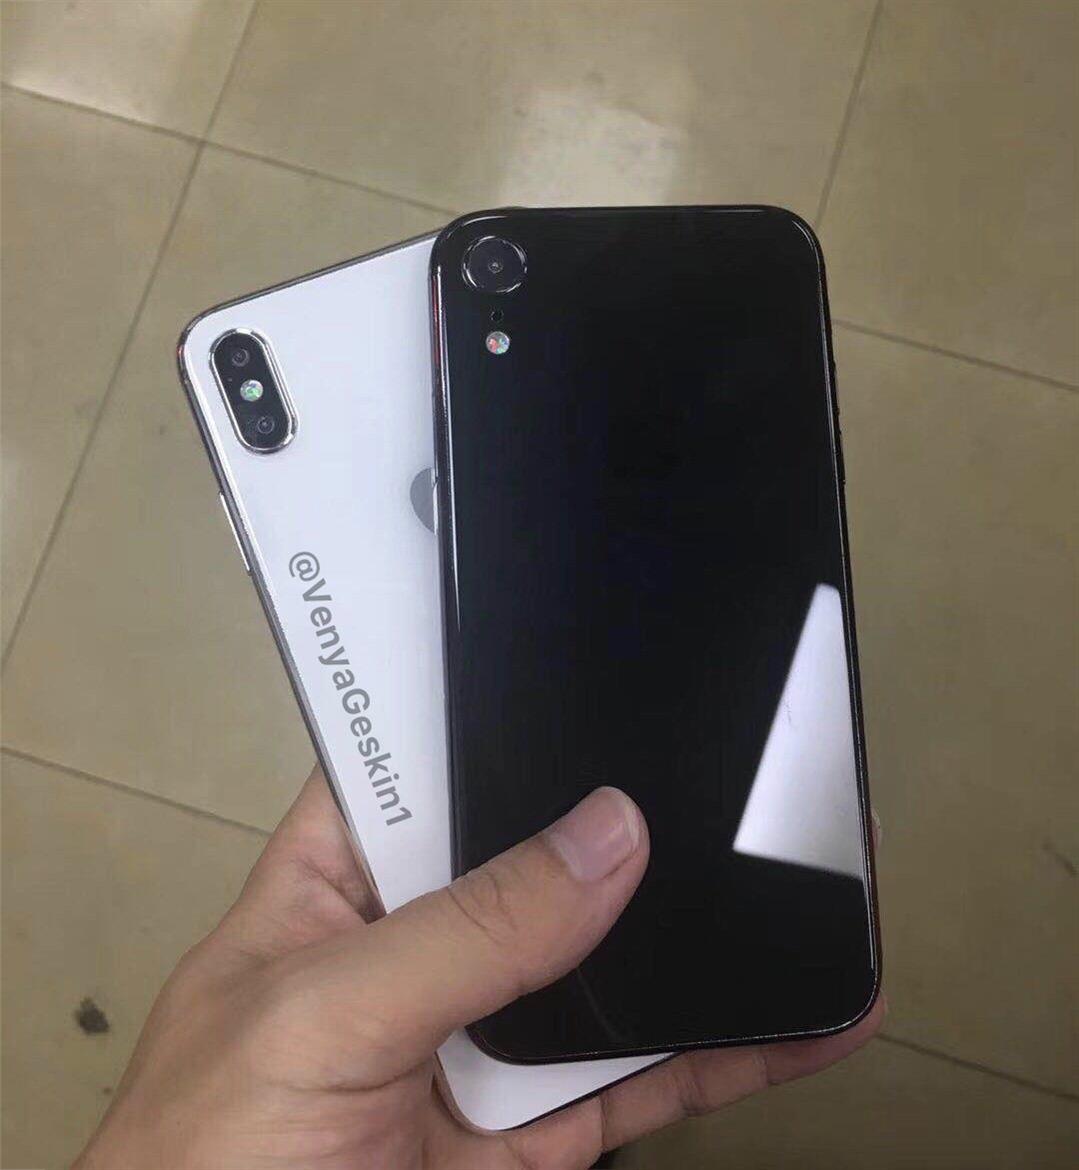 Apple's 2018 iPhone X Plus And 6.1-inch LCD iPhone Shown In Leaked Photos